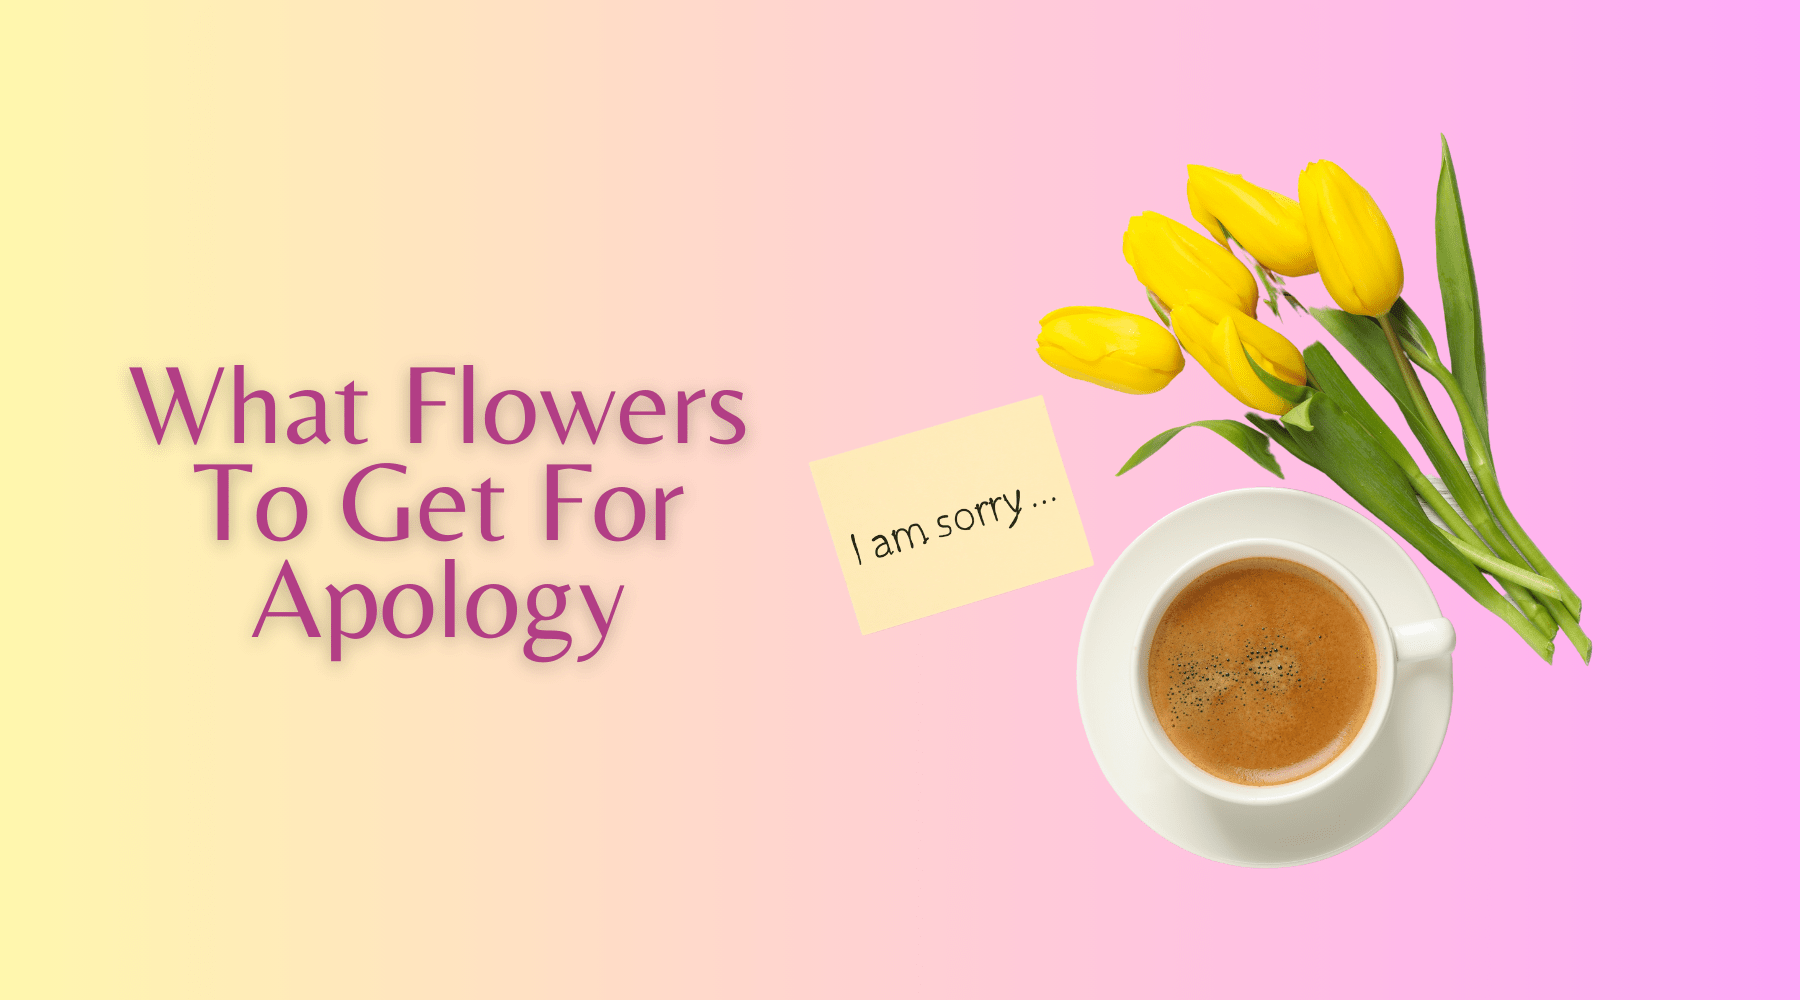 What Flowers To Get For Apology